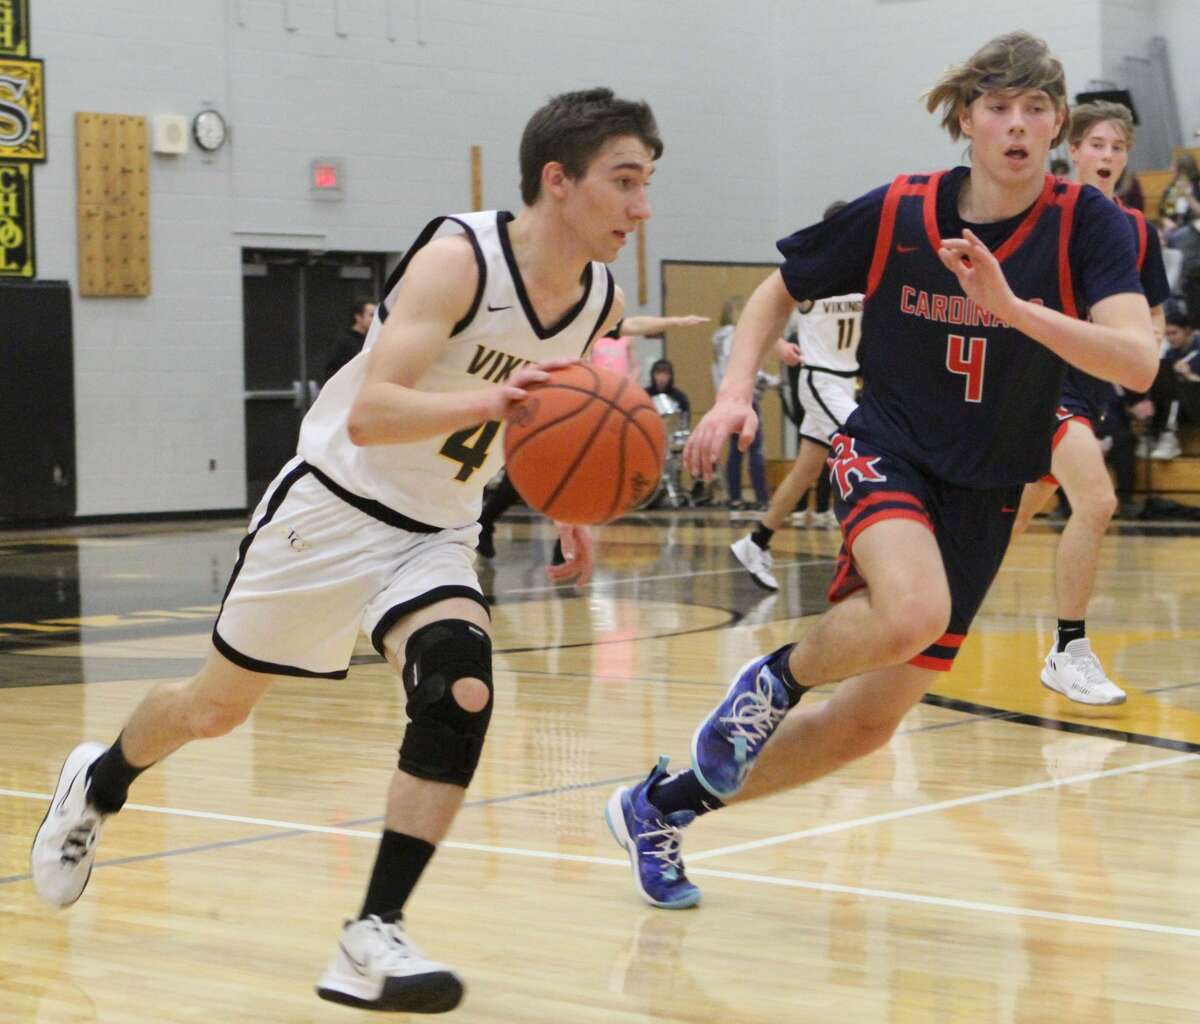 Tri County junior Brett Flintoff, left, paces up the court while defended by BR's Mason Dunn during Friday night.